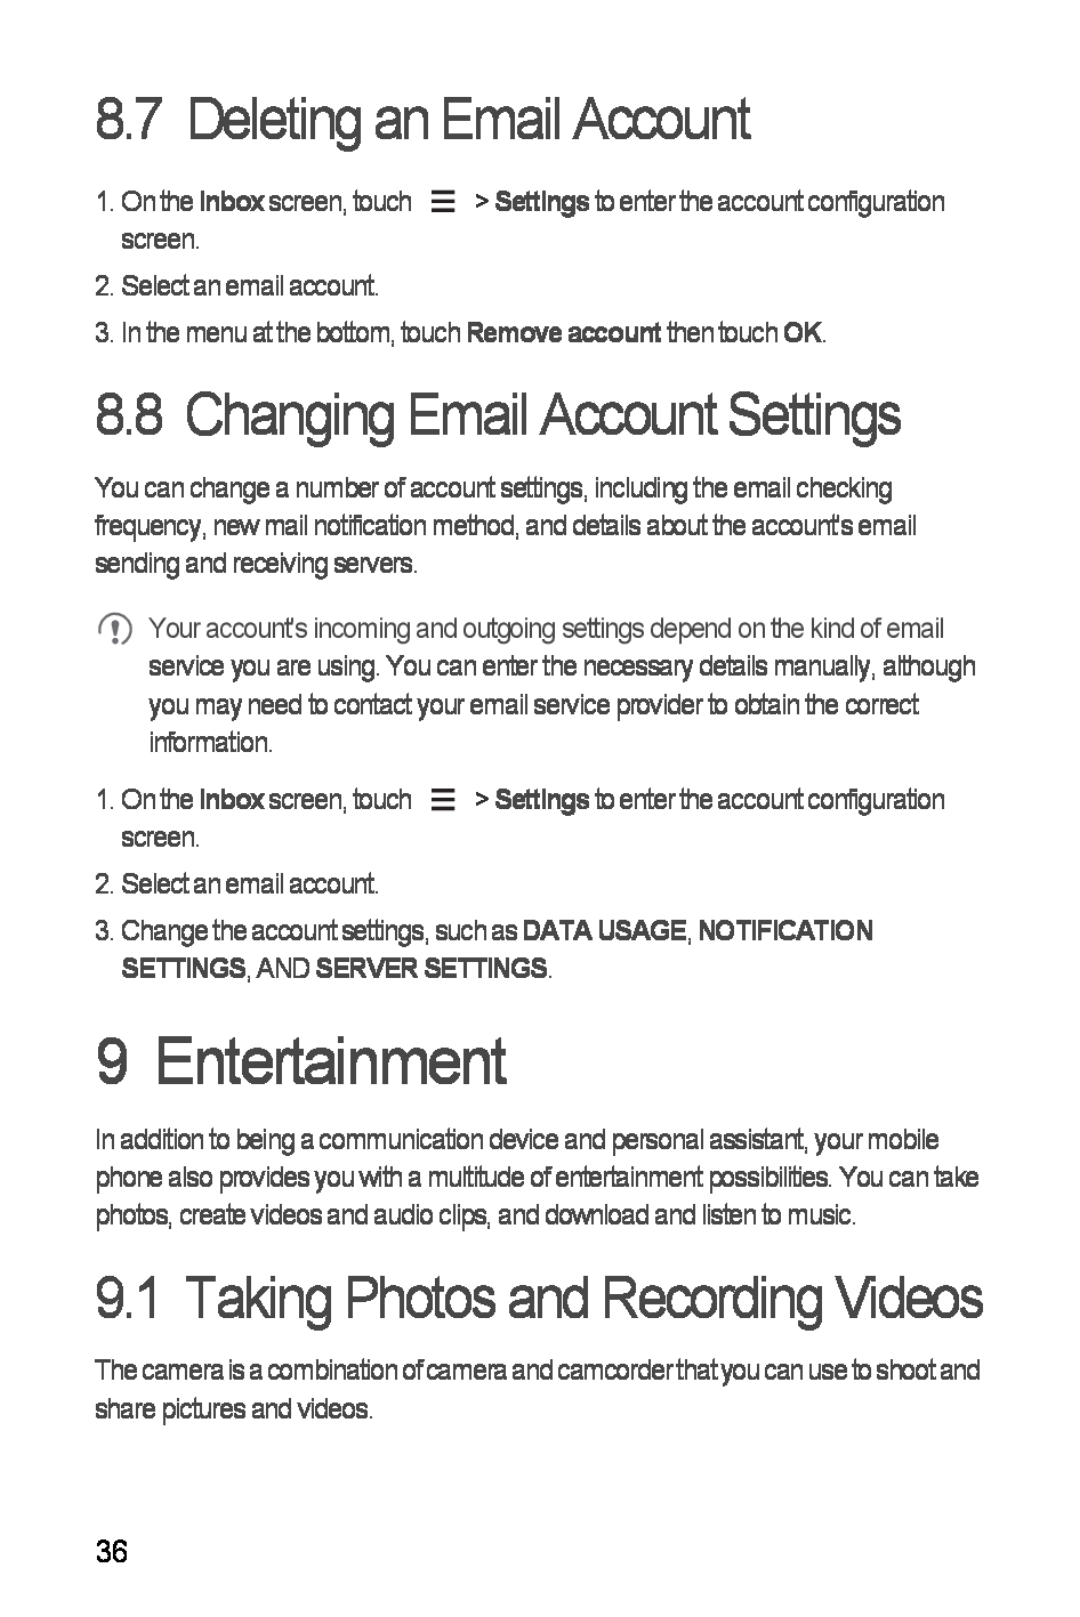 Huawei H881C Entertainment, Deleting an Email Account, Changing Email Account Settings, Taking Photos and Recording Videos 